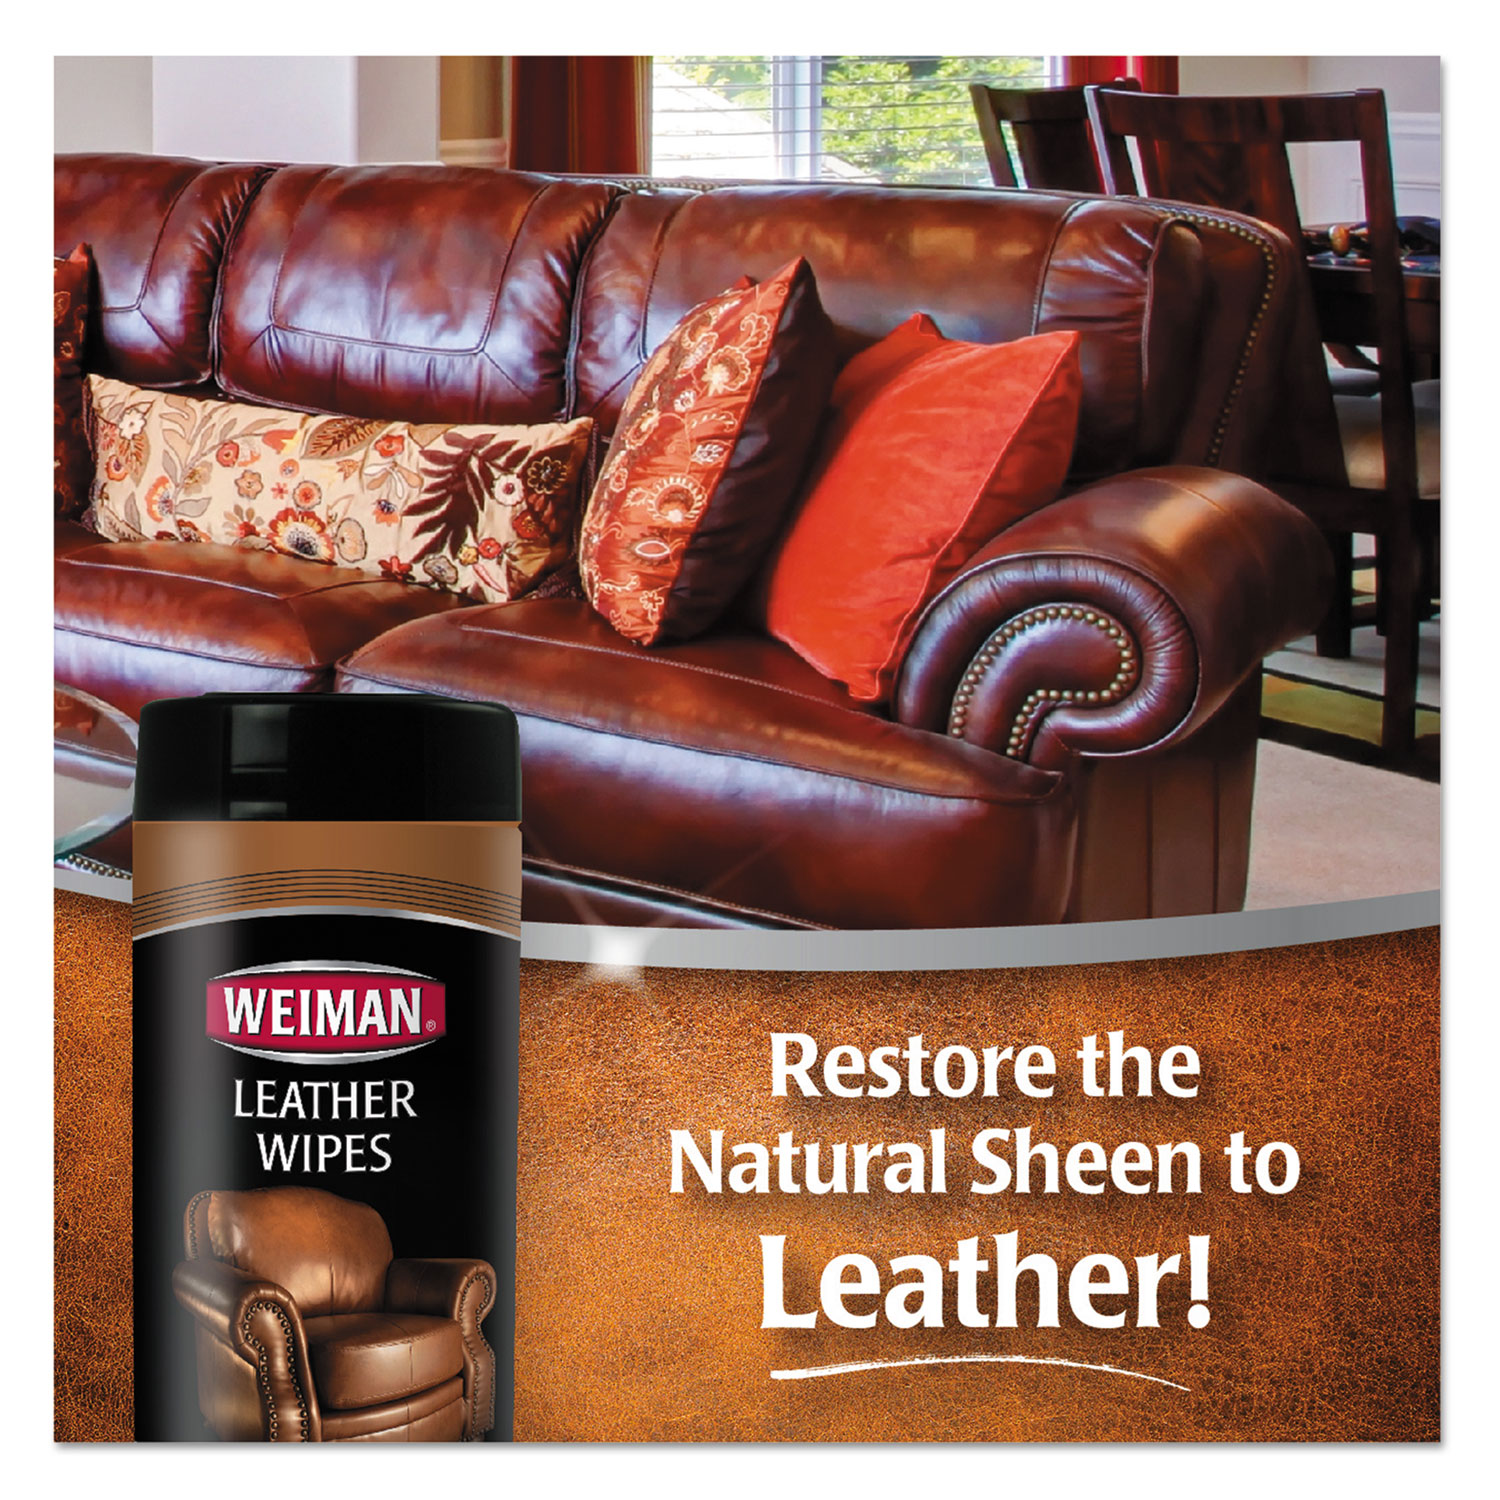 Leather Wipes